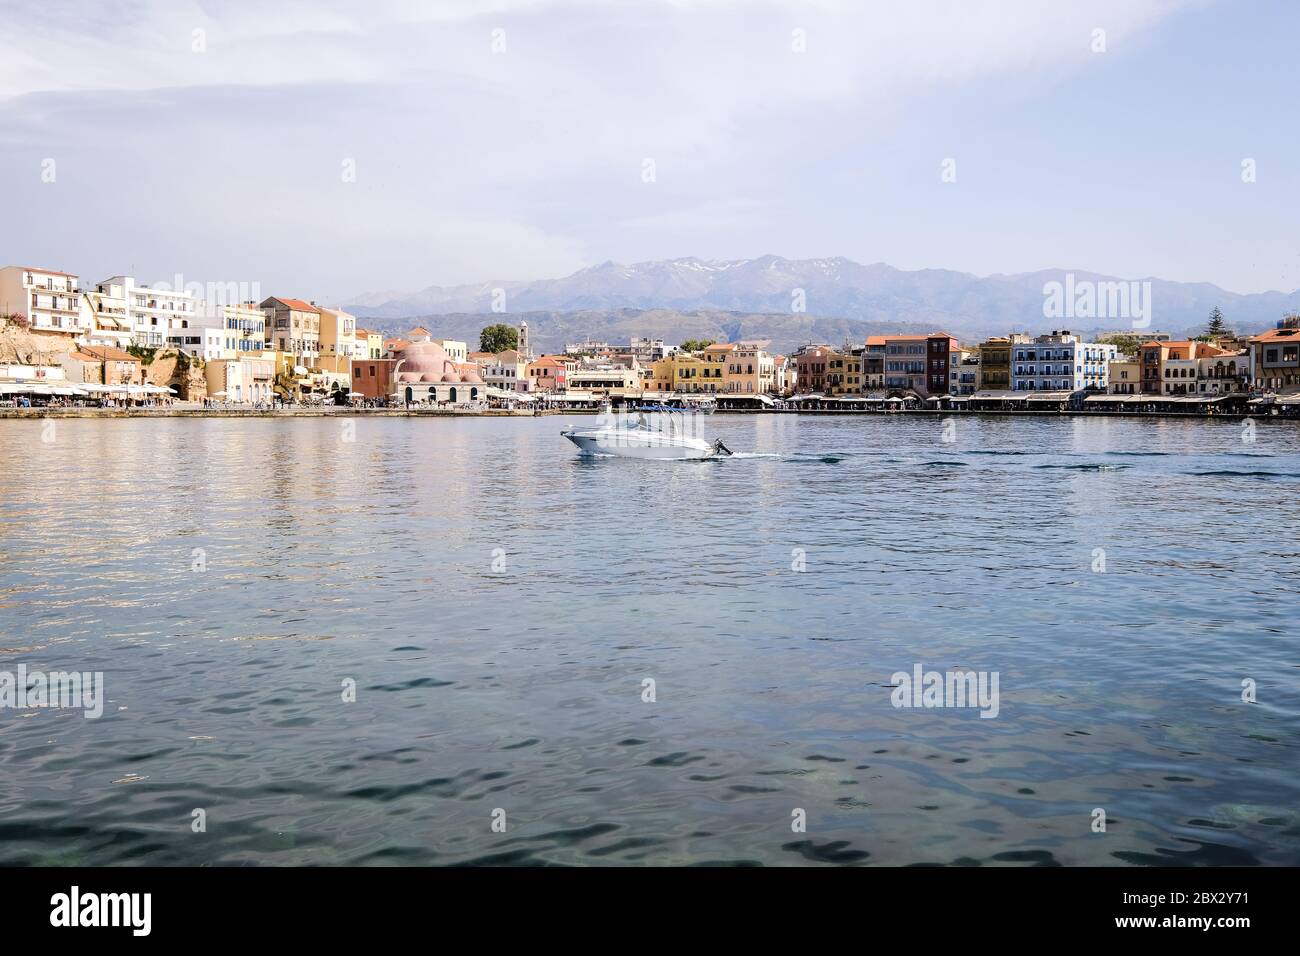 View of Chania Harbour from the Lighthouse, Crete, Greece Stock Photo